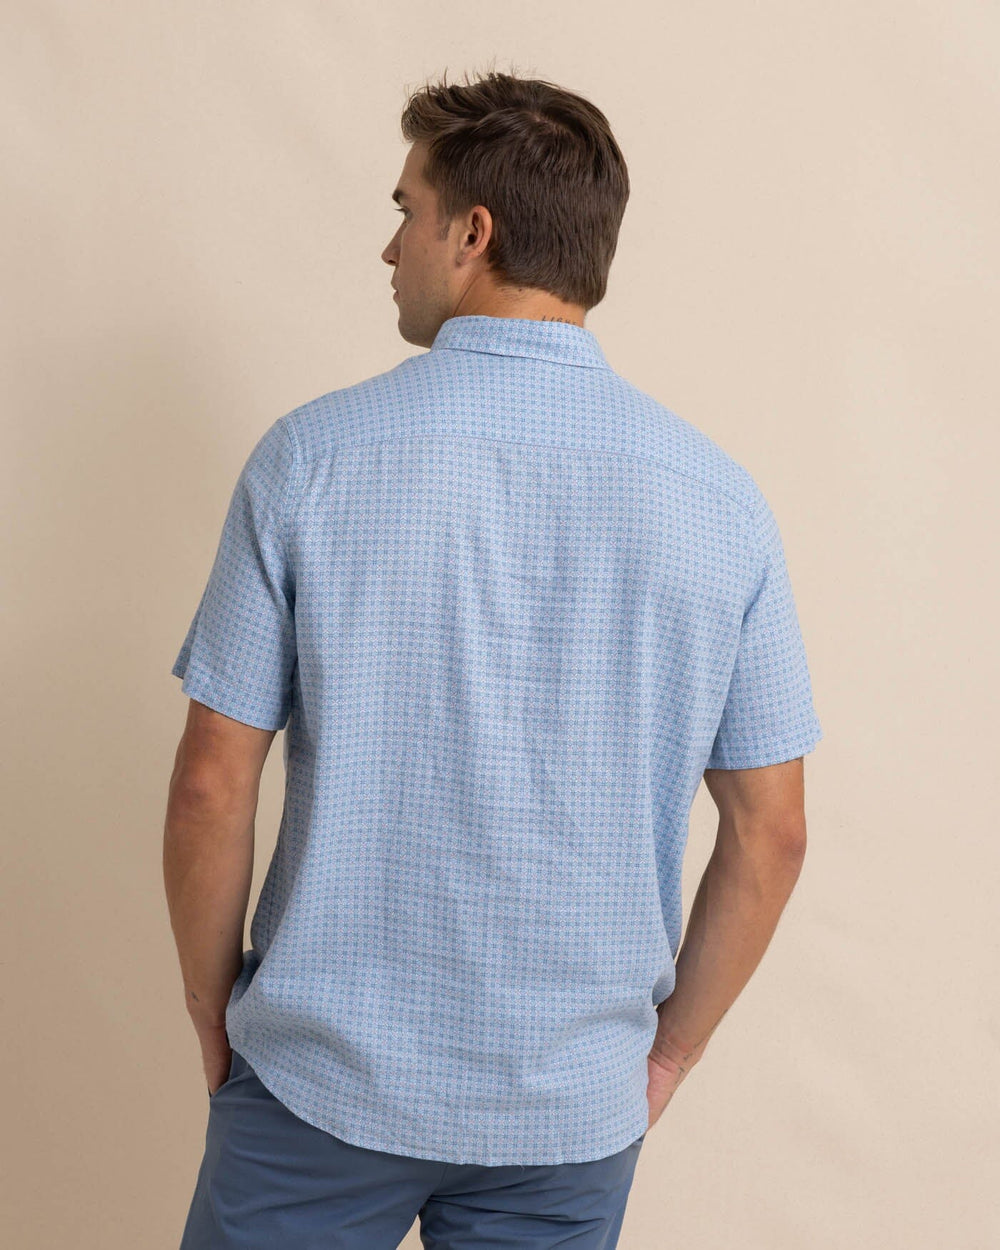 The back view of the Southern Tide Linen Rayon White Lotus Short Sleeve Sport Shirt by Southern Tide - Clearwater Blue